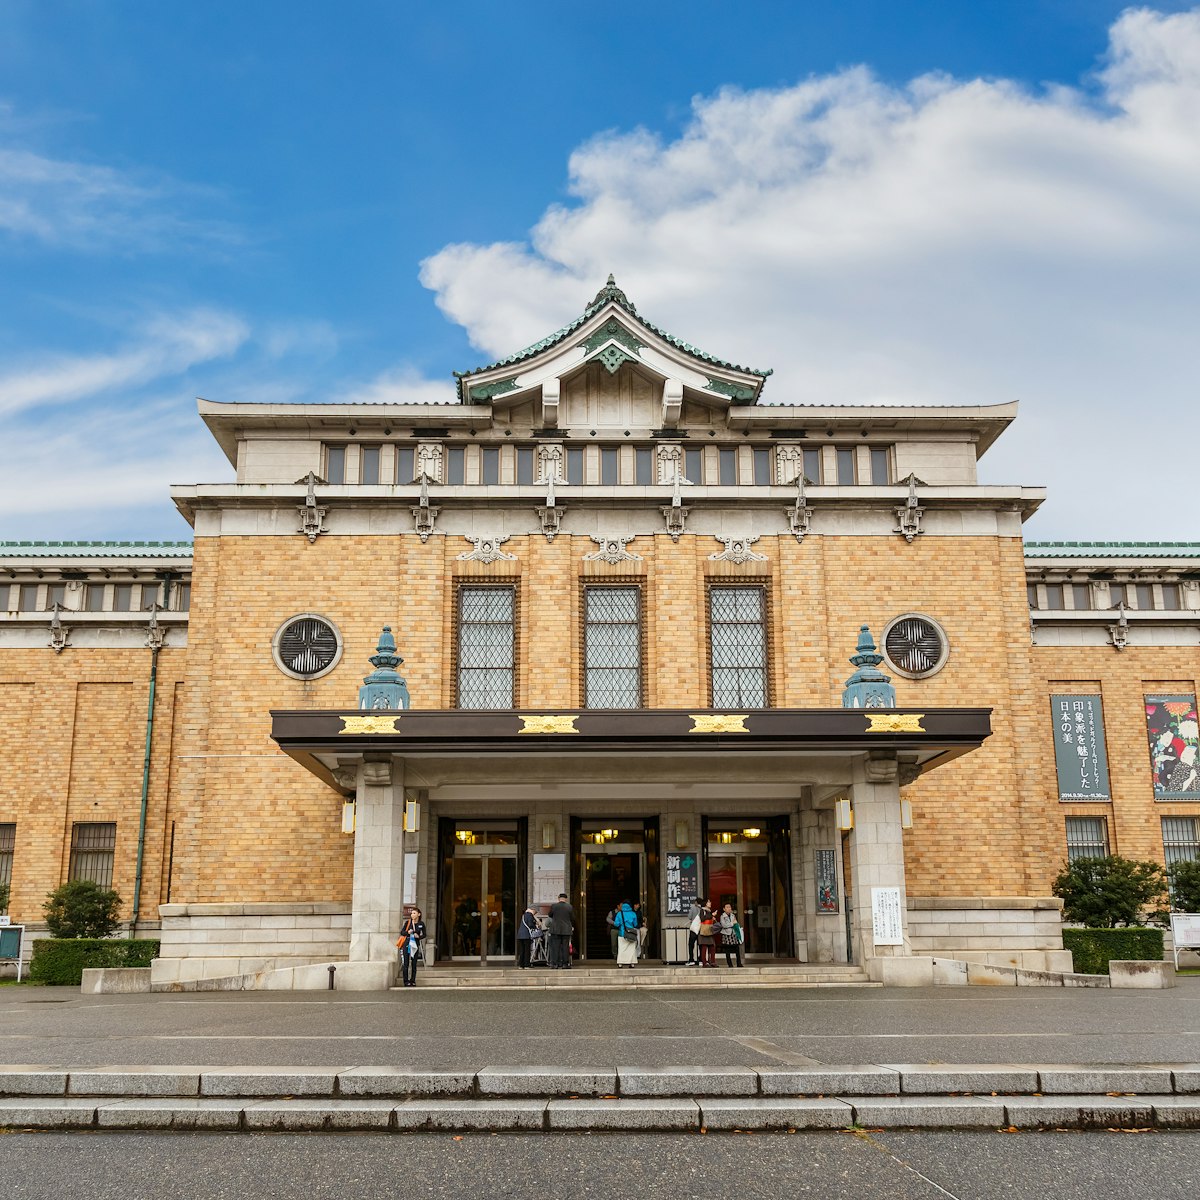 KYOTO, JAPAN - OCTOBER 22: Municipal Museum of Art in Kyoto, Japan on October 22, 2014. One of the oldest art museums, opened in 1928 as a commemoration of the Showa emperor's coronation ceremony; Shutterstock ID 245174173; Your name (First / Last): Josh Vogel; Project no. or GL code: 56530; Network activity no. or Cost Centre: Online-Design; Product or Project: 65050/7529/Josh Vogel/LP.com Destination Galleries